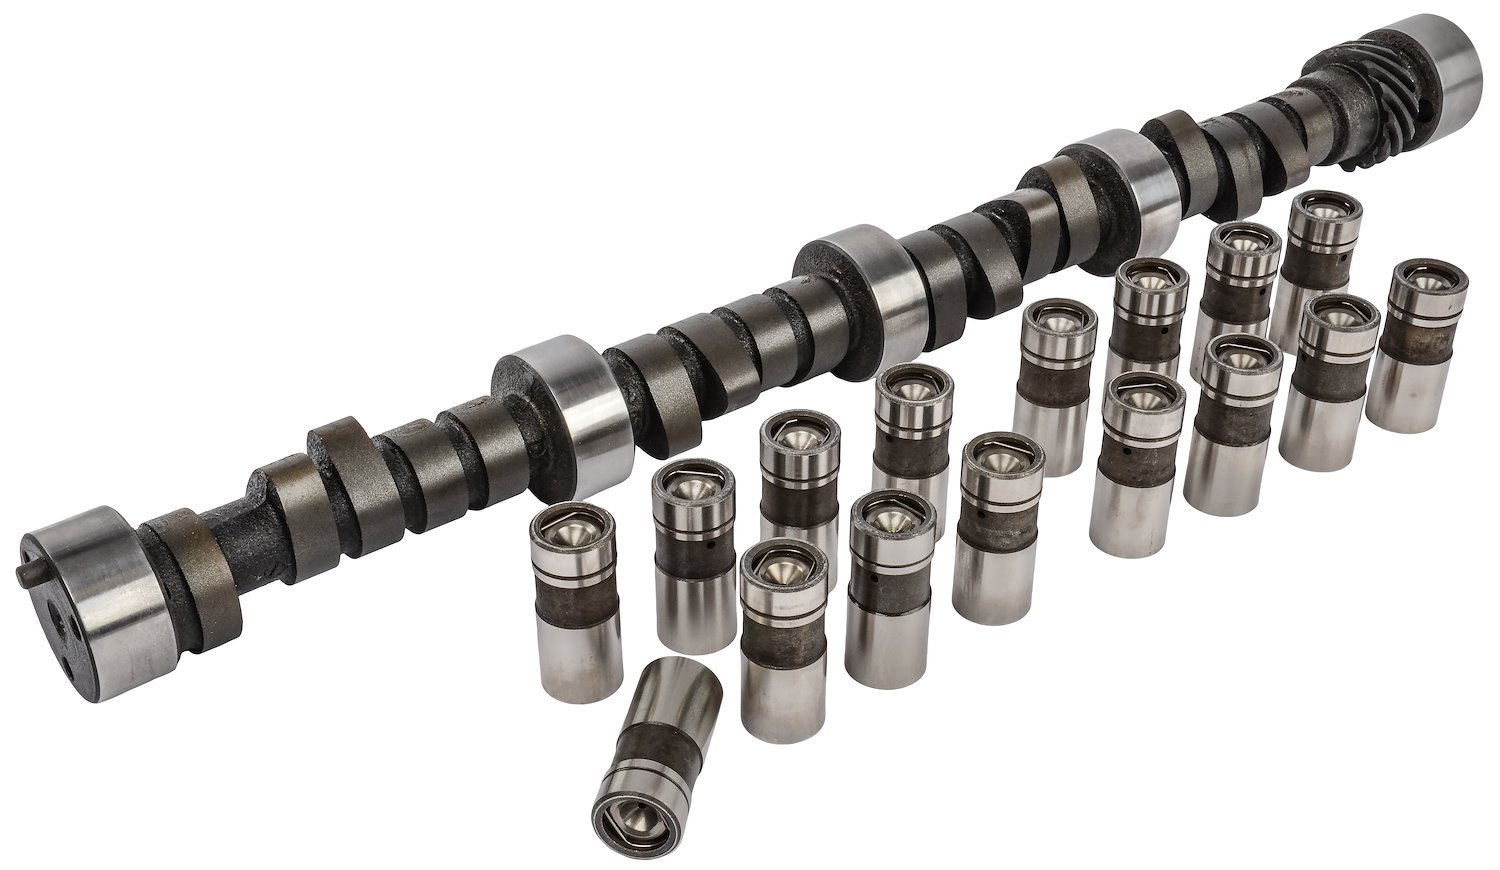 Hydraulic Flat Tappet Camshaft & Lifters for 1967-1990 Chevy 396-454